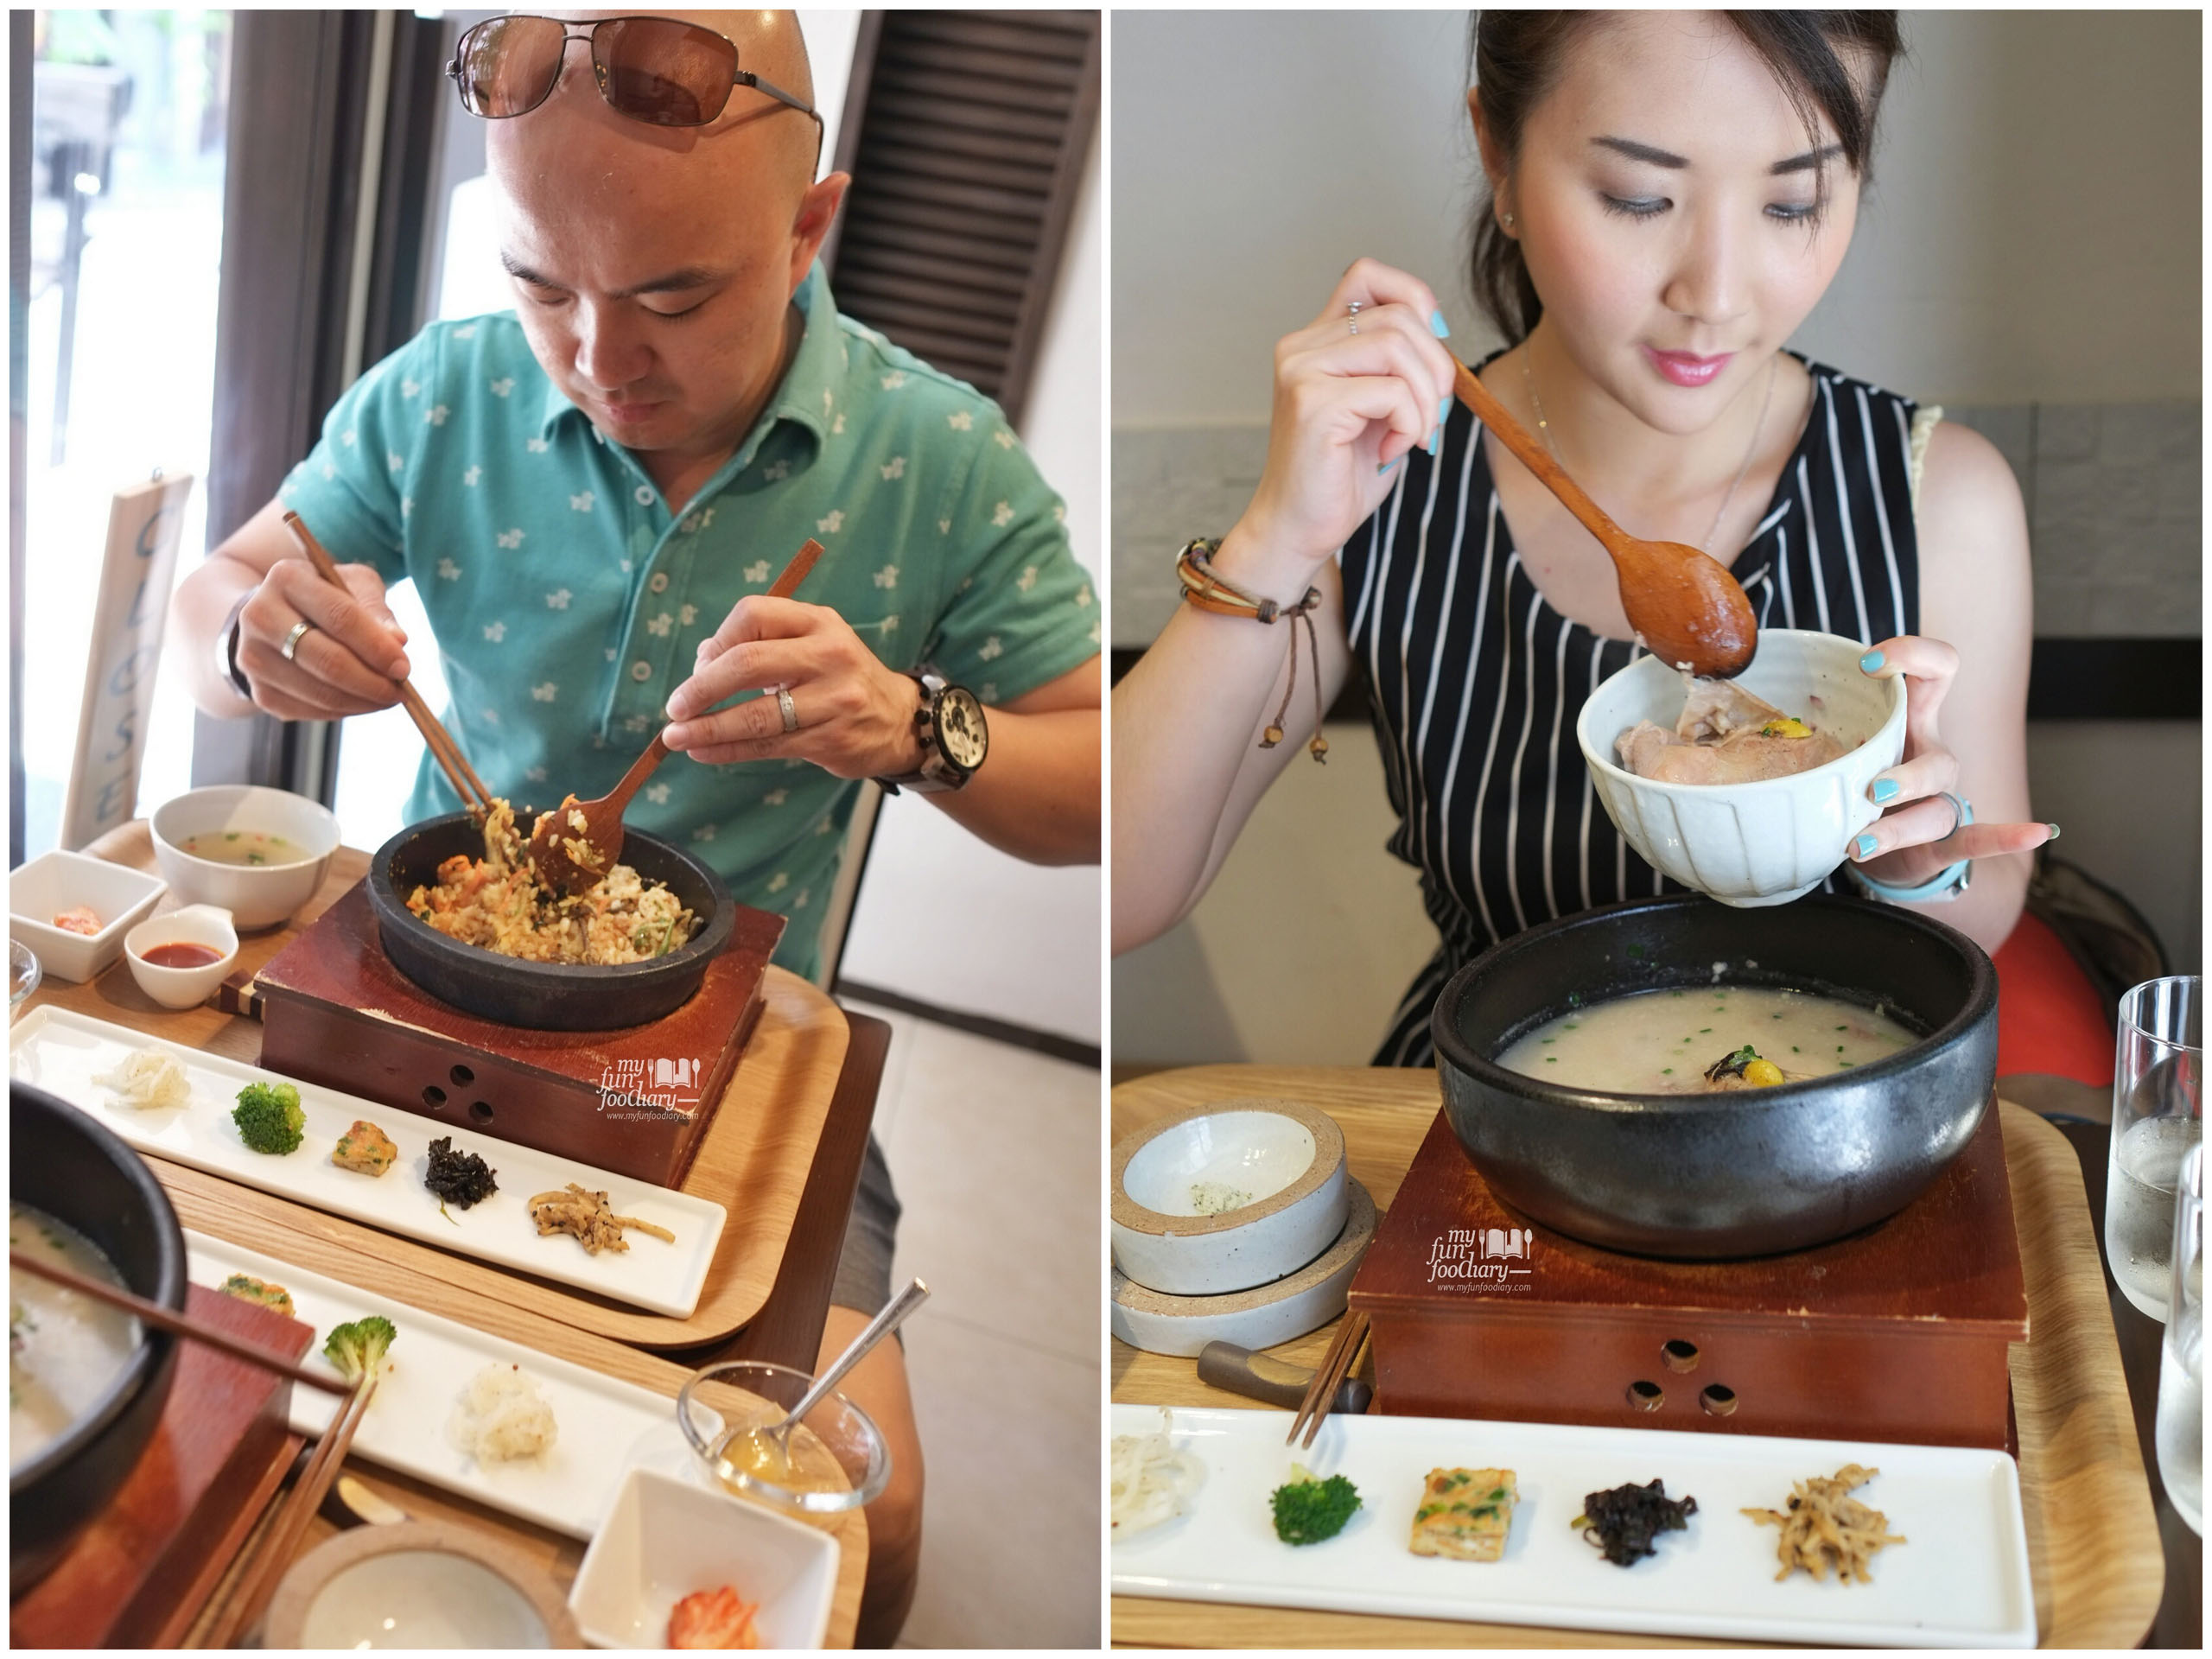 Mullie and Andy were enjoying their Korean Fusion Lunch at Osuri Restaurant in Tokyo Japan by Myfunfoodiary